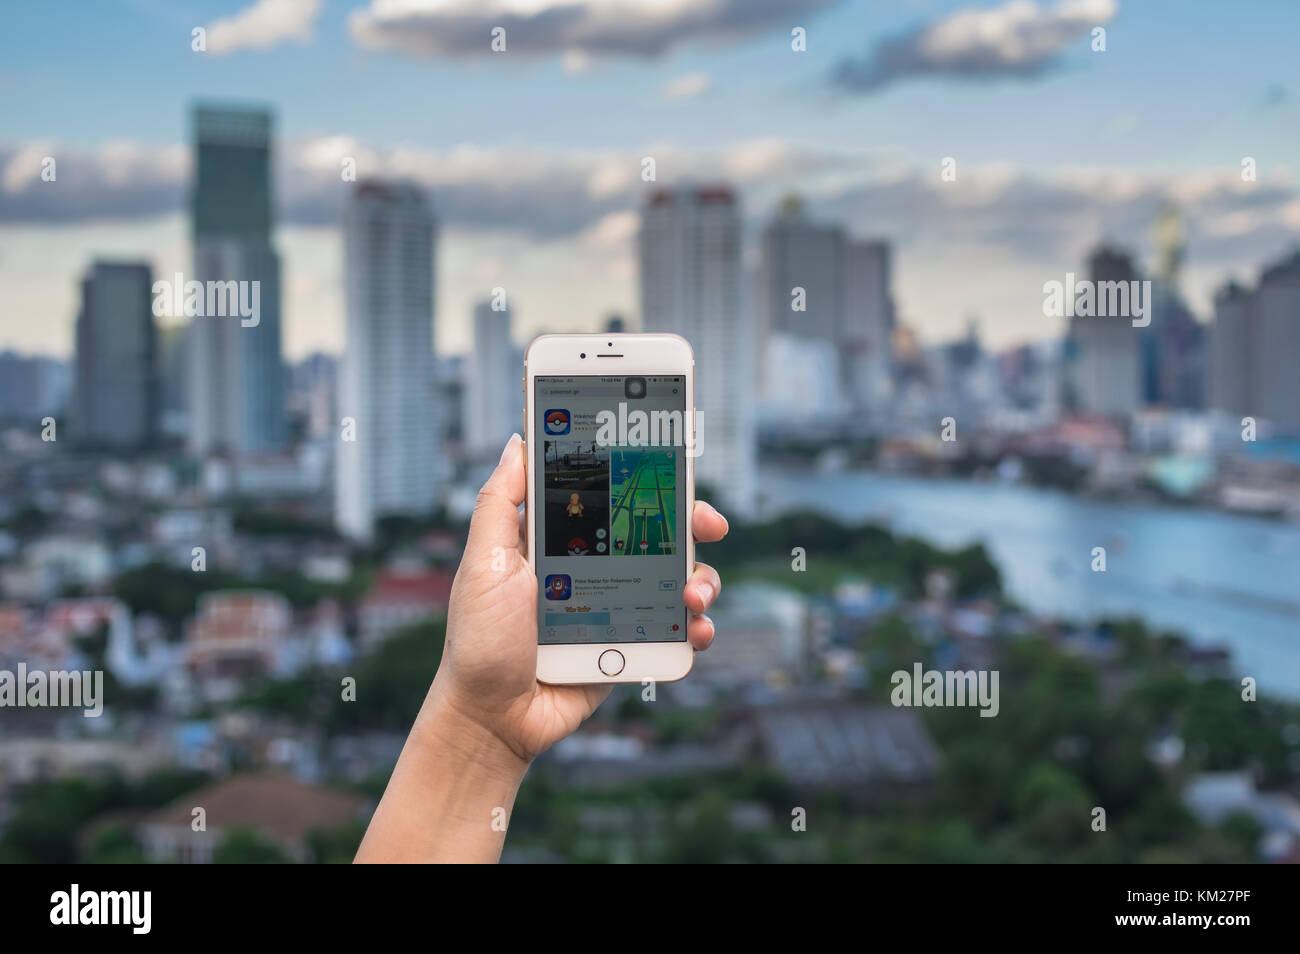 Bangkok, Thailand - July 31, 2016 : Hand holding Apple iPhone6 mobile phone showing the Pokemon Go application at screen over the bangkok cityscape ph Stock Photo